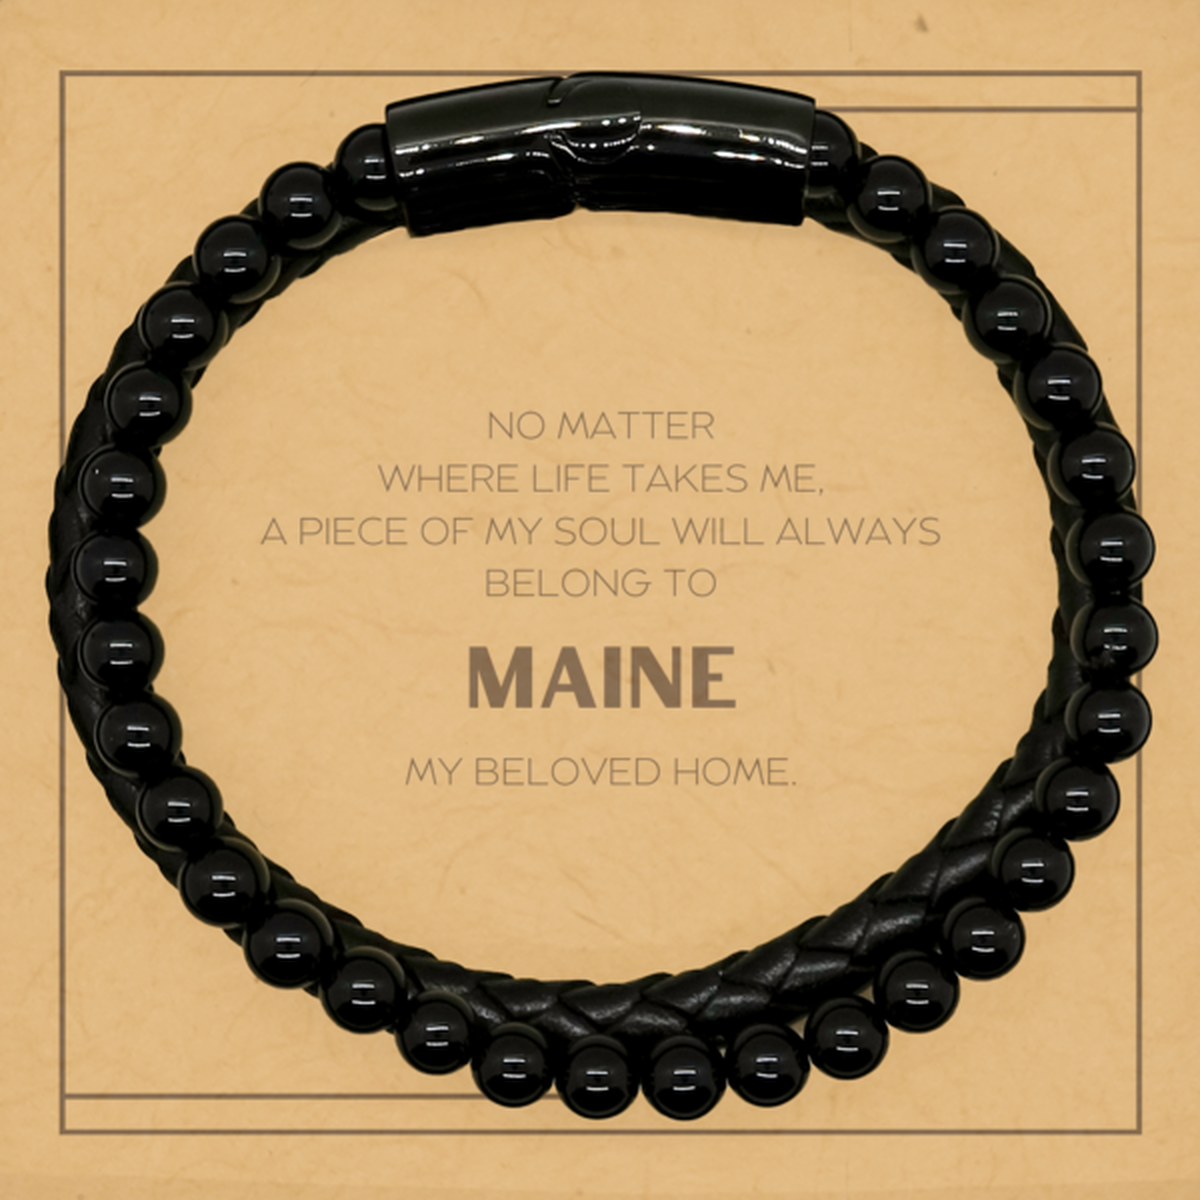 Love Maine State Gifts, My soul will always belong to Maine, Proud Stone Leather Bracelets, Birthday Unique Gifts For Maine Men, Women, Friends